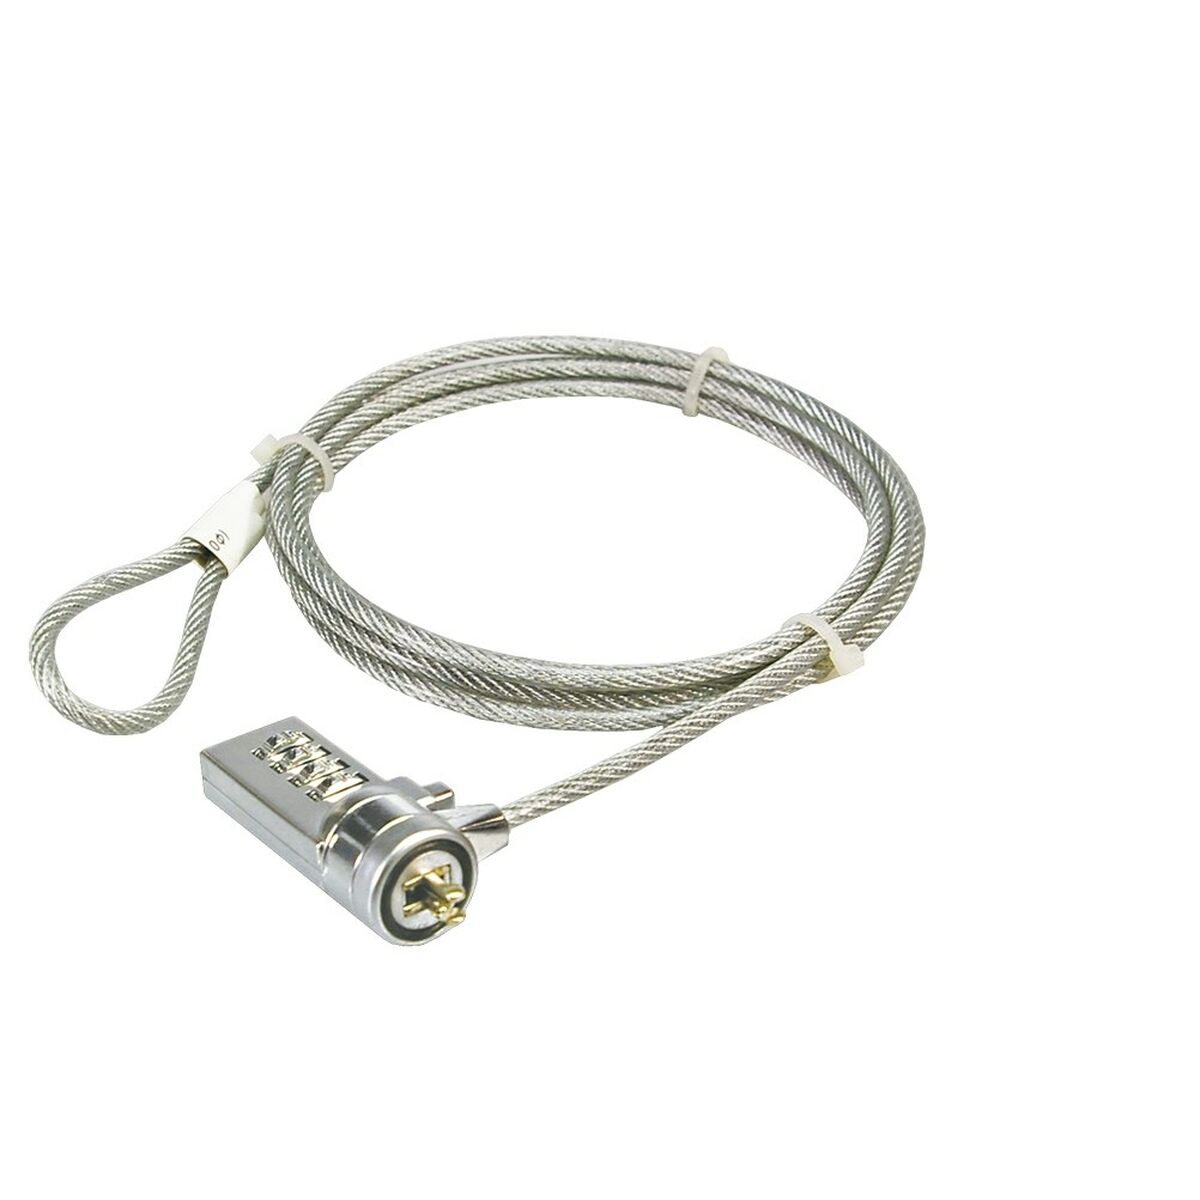 Security Cable LogiLink 1,5 m